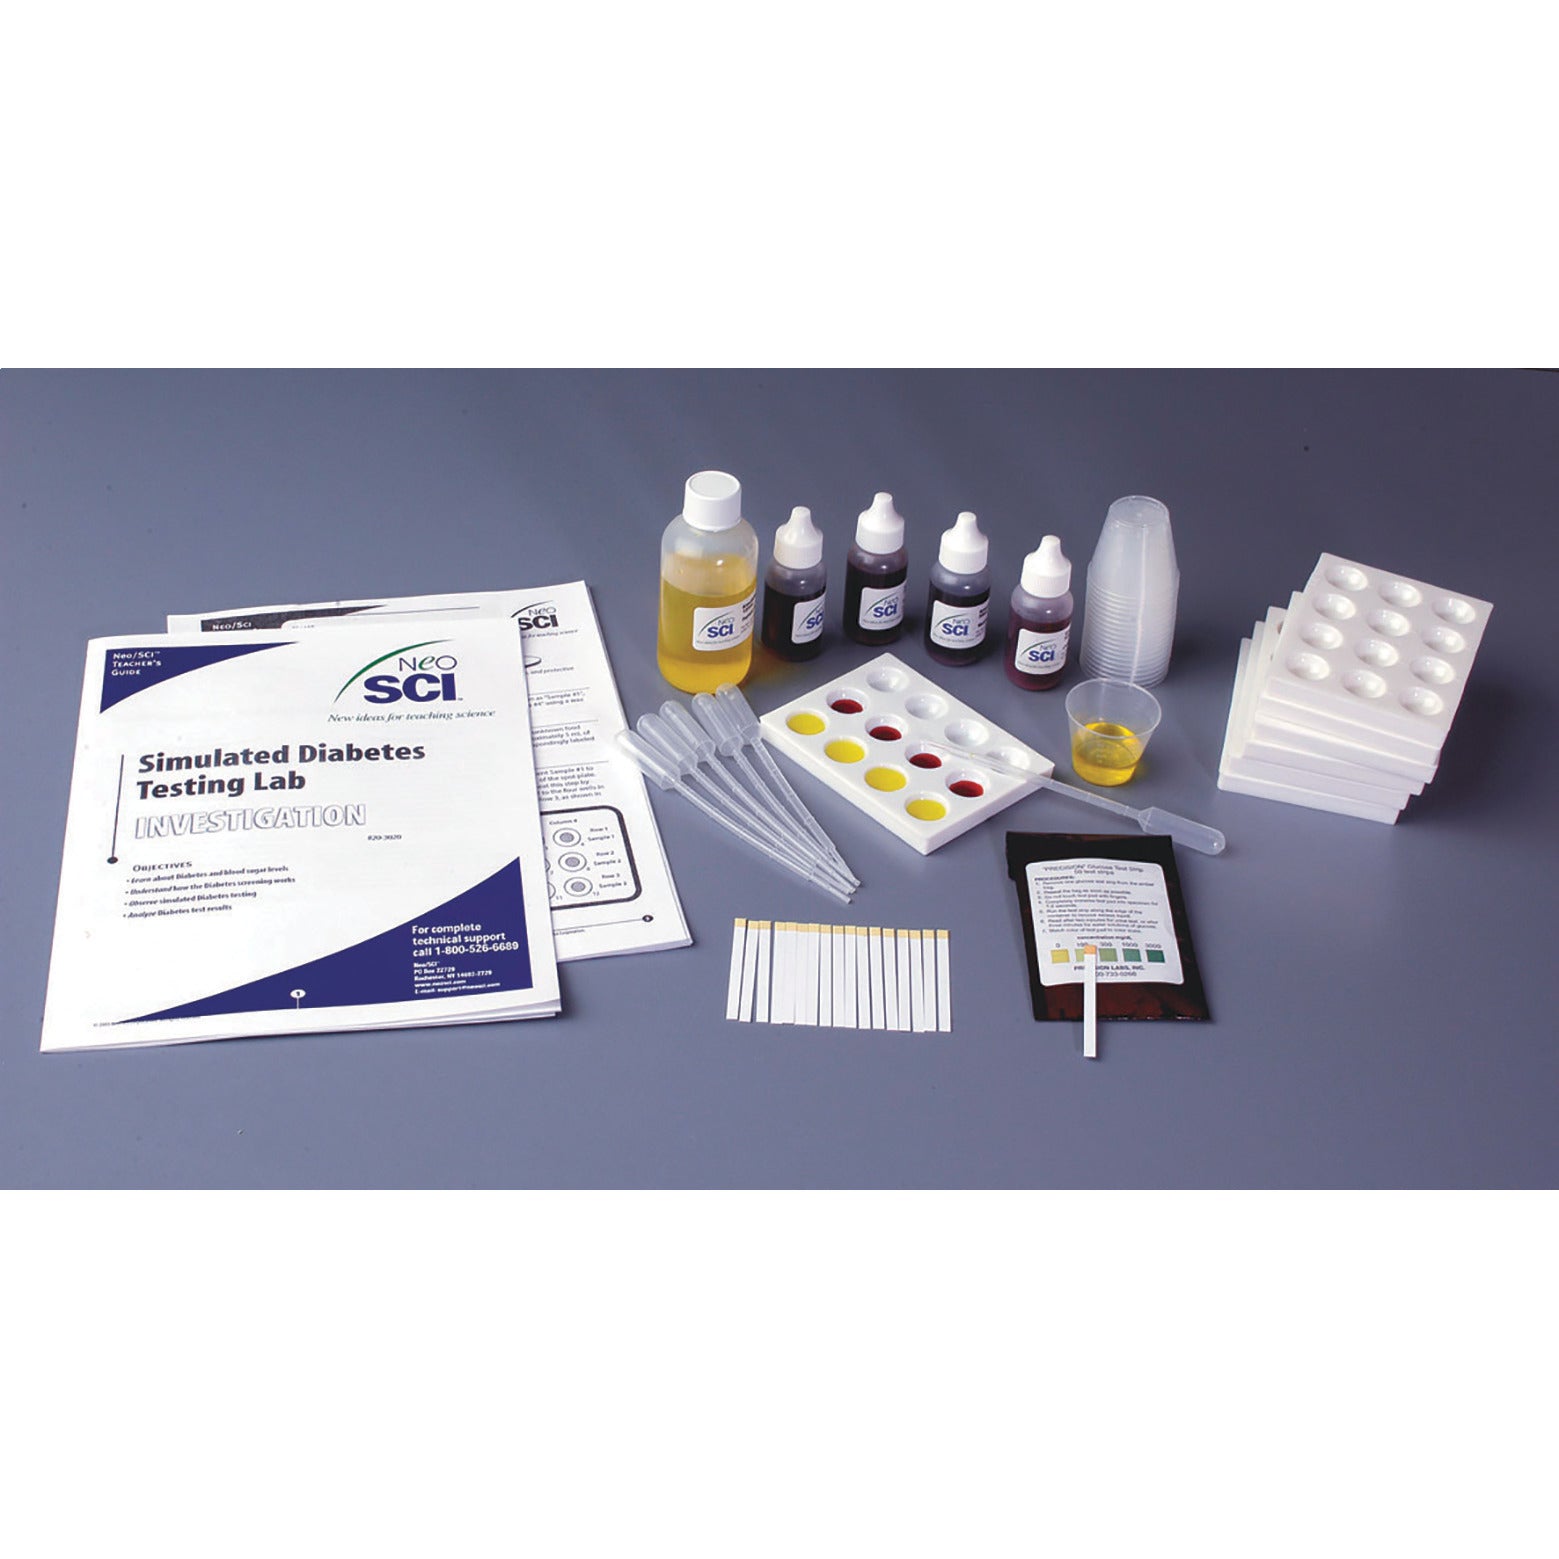 Simulated ABO/Rh Blood Typing Kit